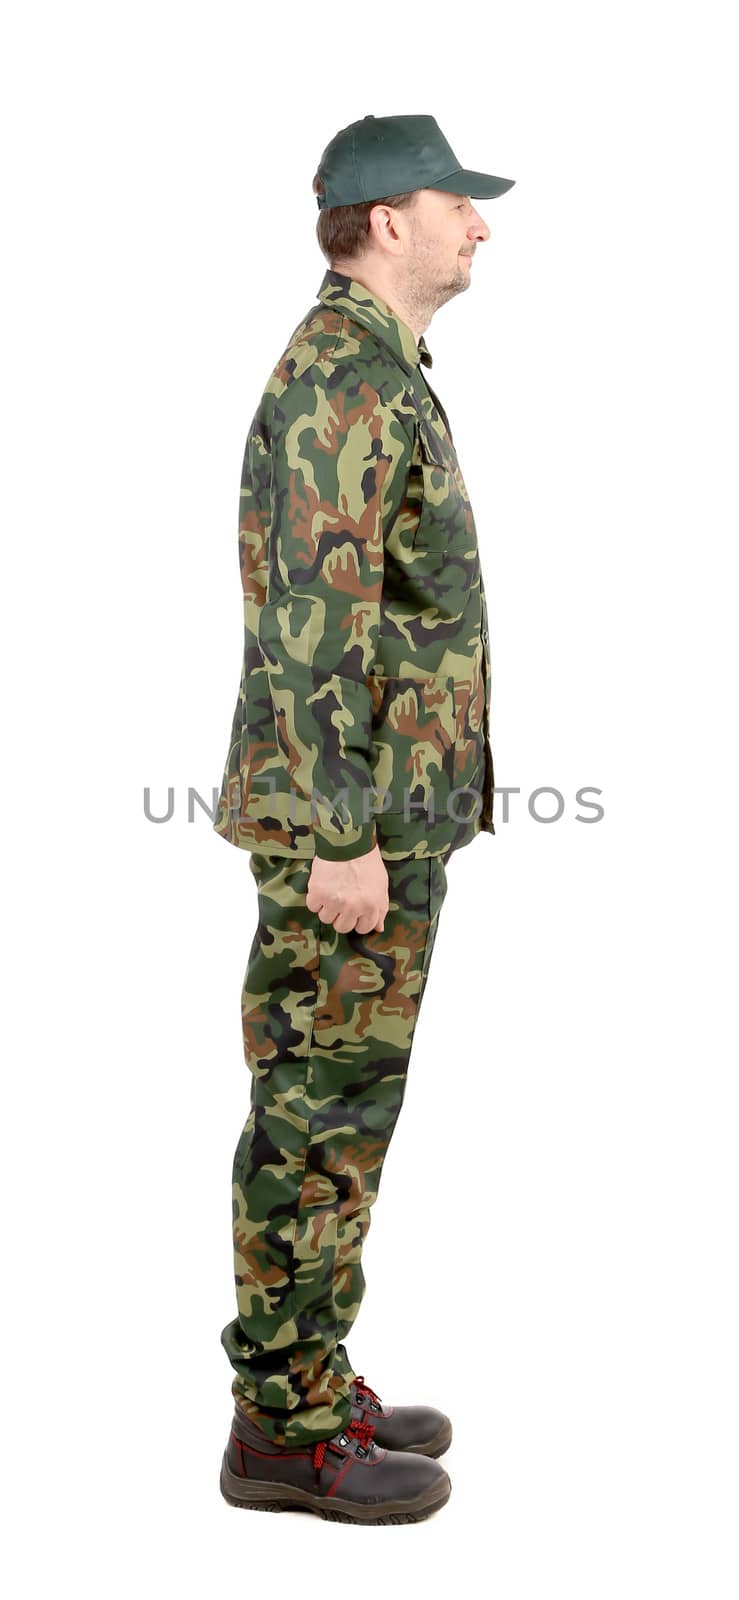 Man in military suit. by indigolotos